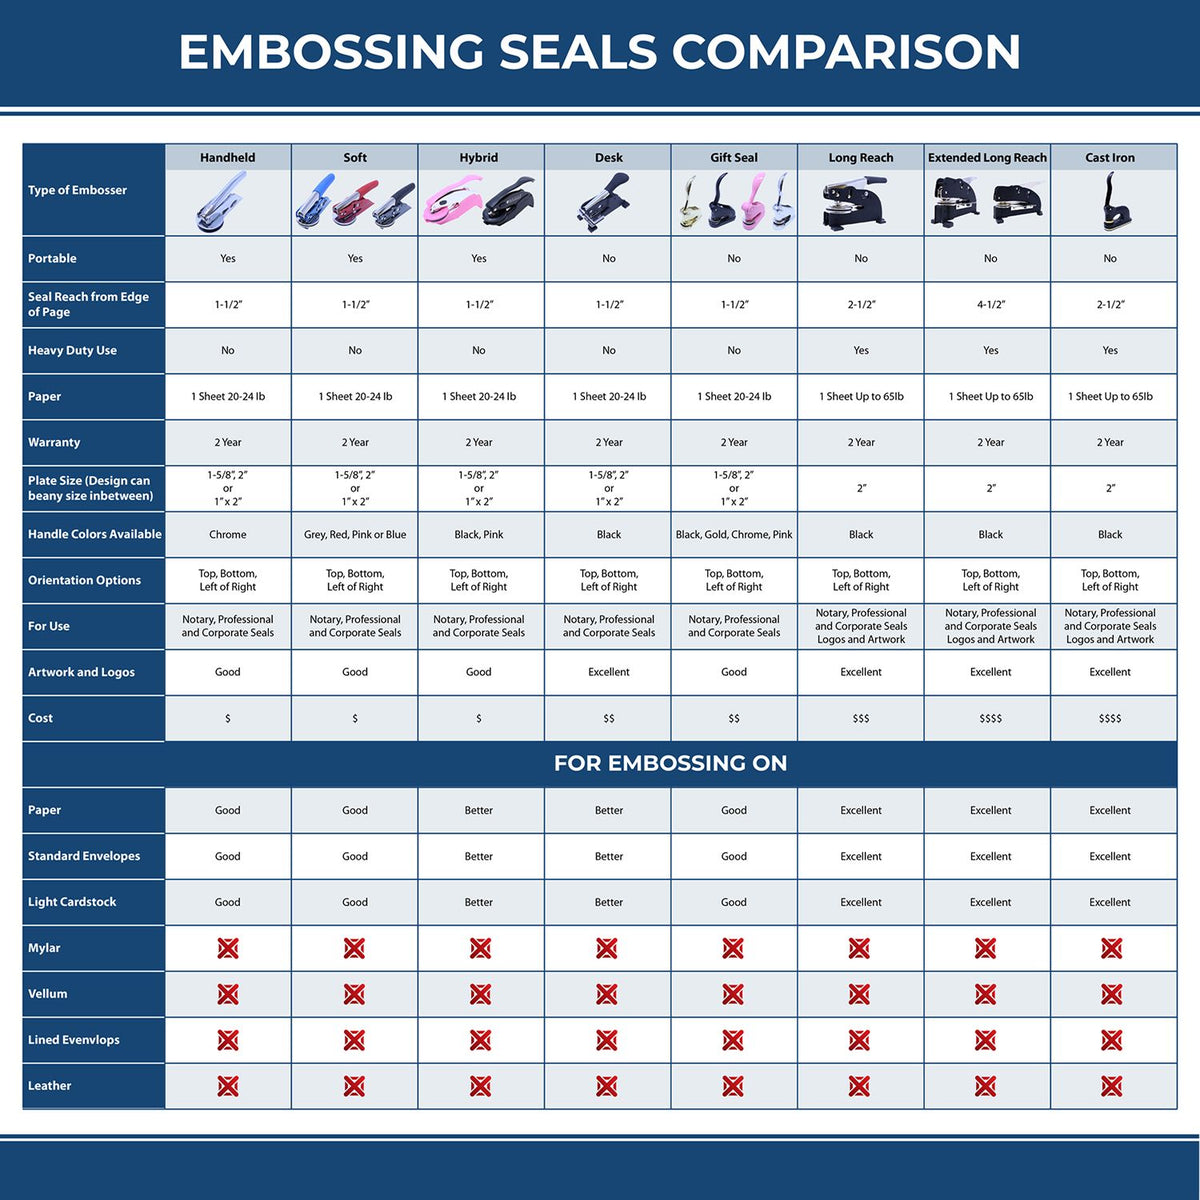 A comparison chart for the different types of mount models available for the Handheld California Professional Engineer Embosser.